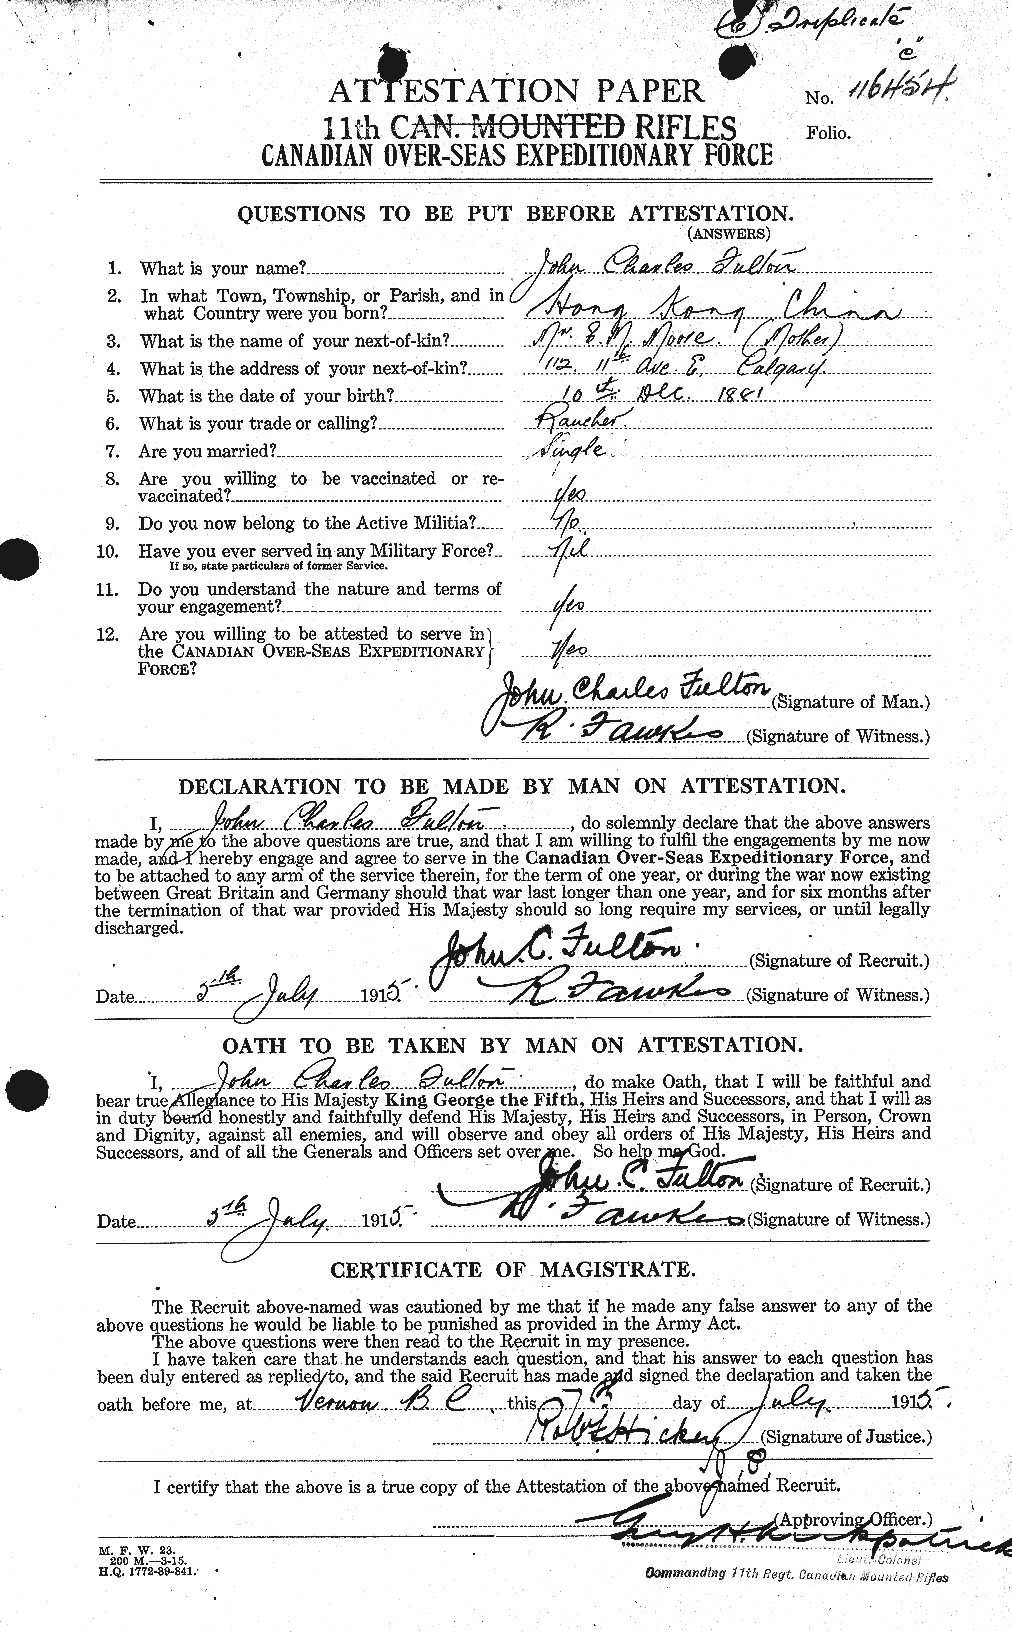 Personnel Records of the First World War - CEF 341401a